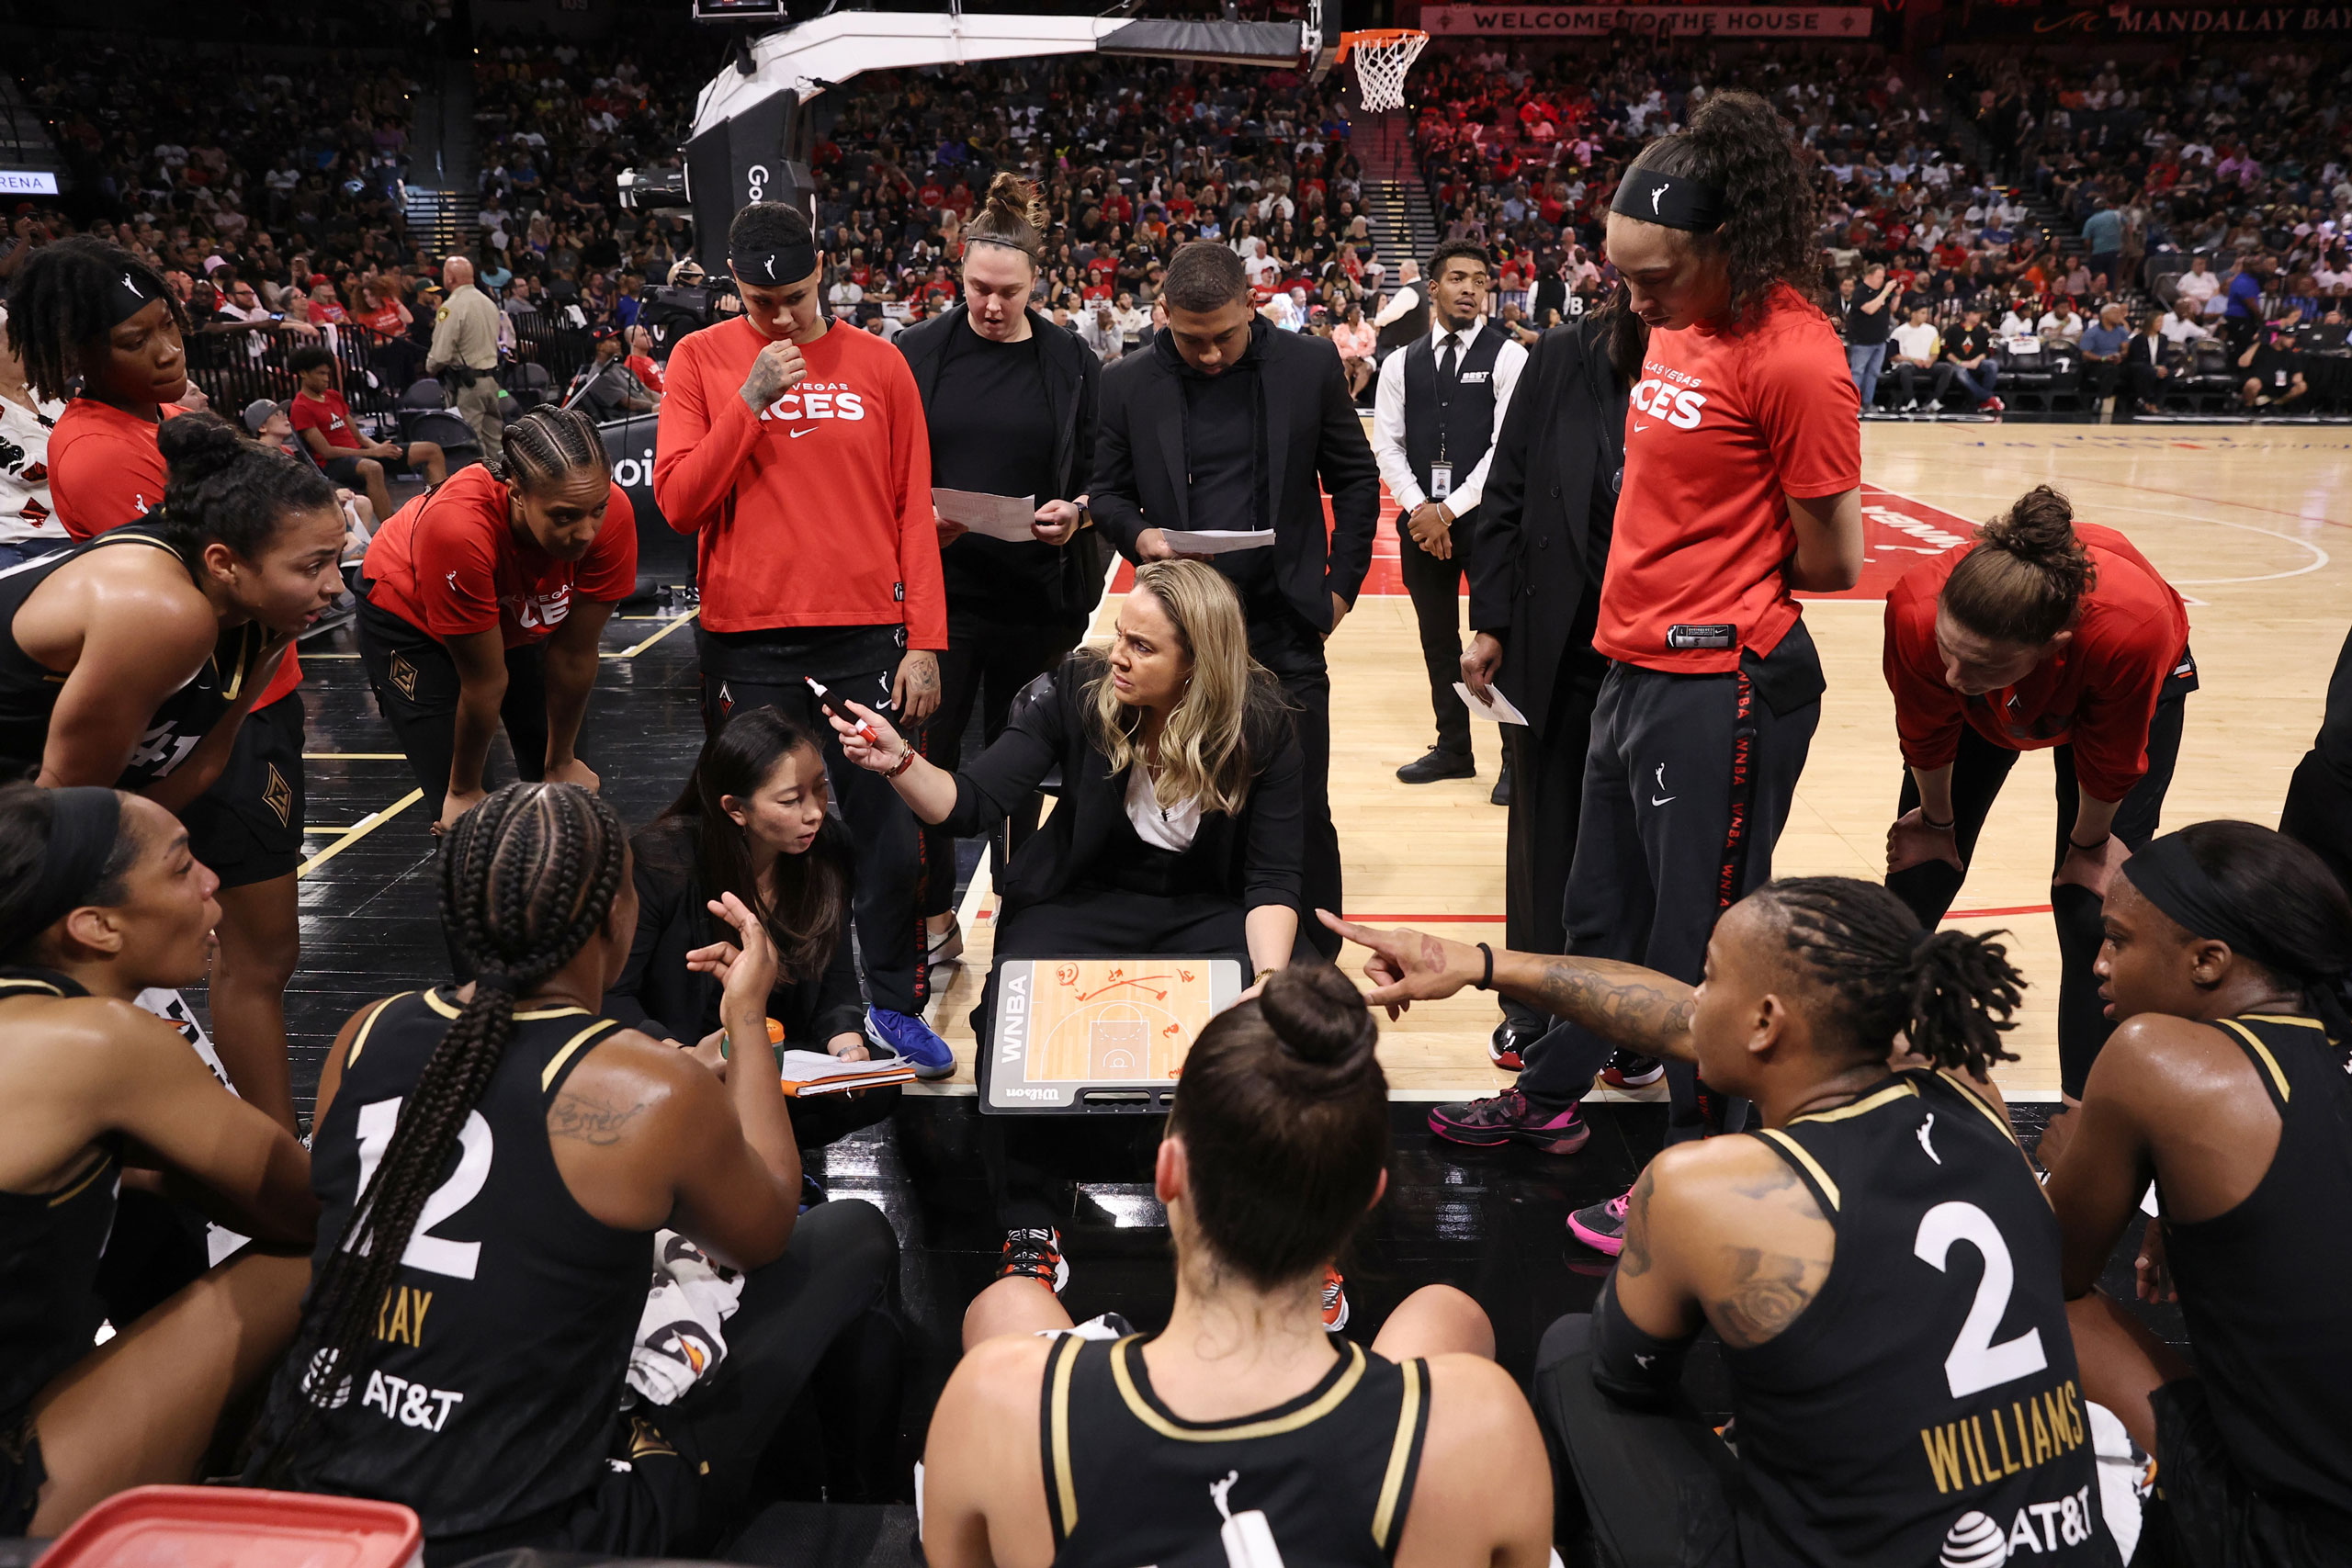 WNBA Coach Becky Hammon Doesnt Need the NBAs Approval Time